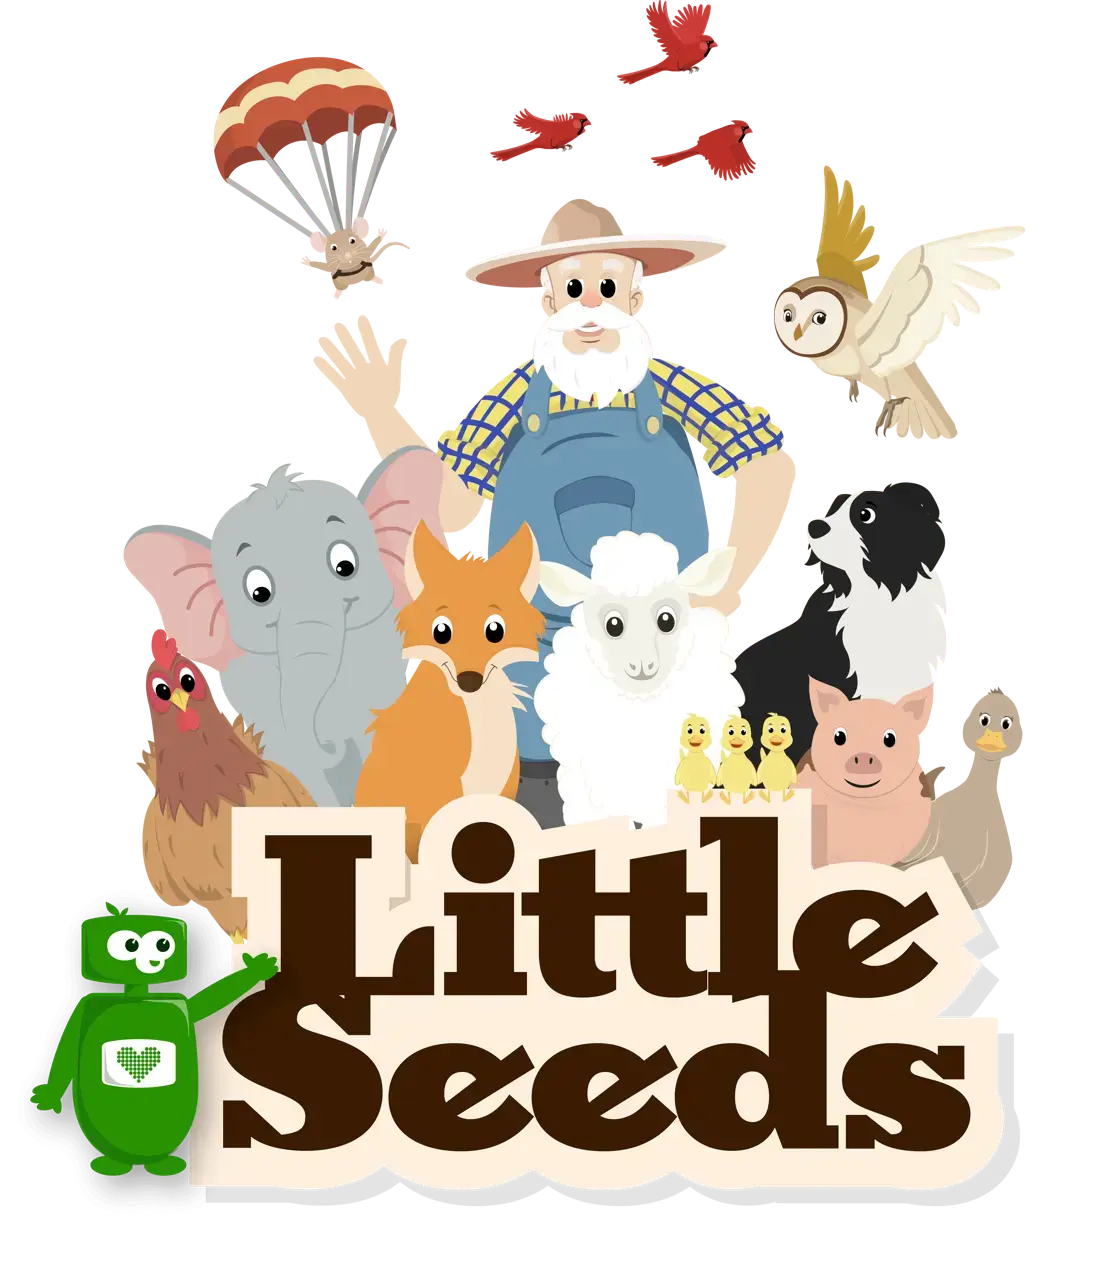 Learning App for Toddlers - Little Seeds